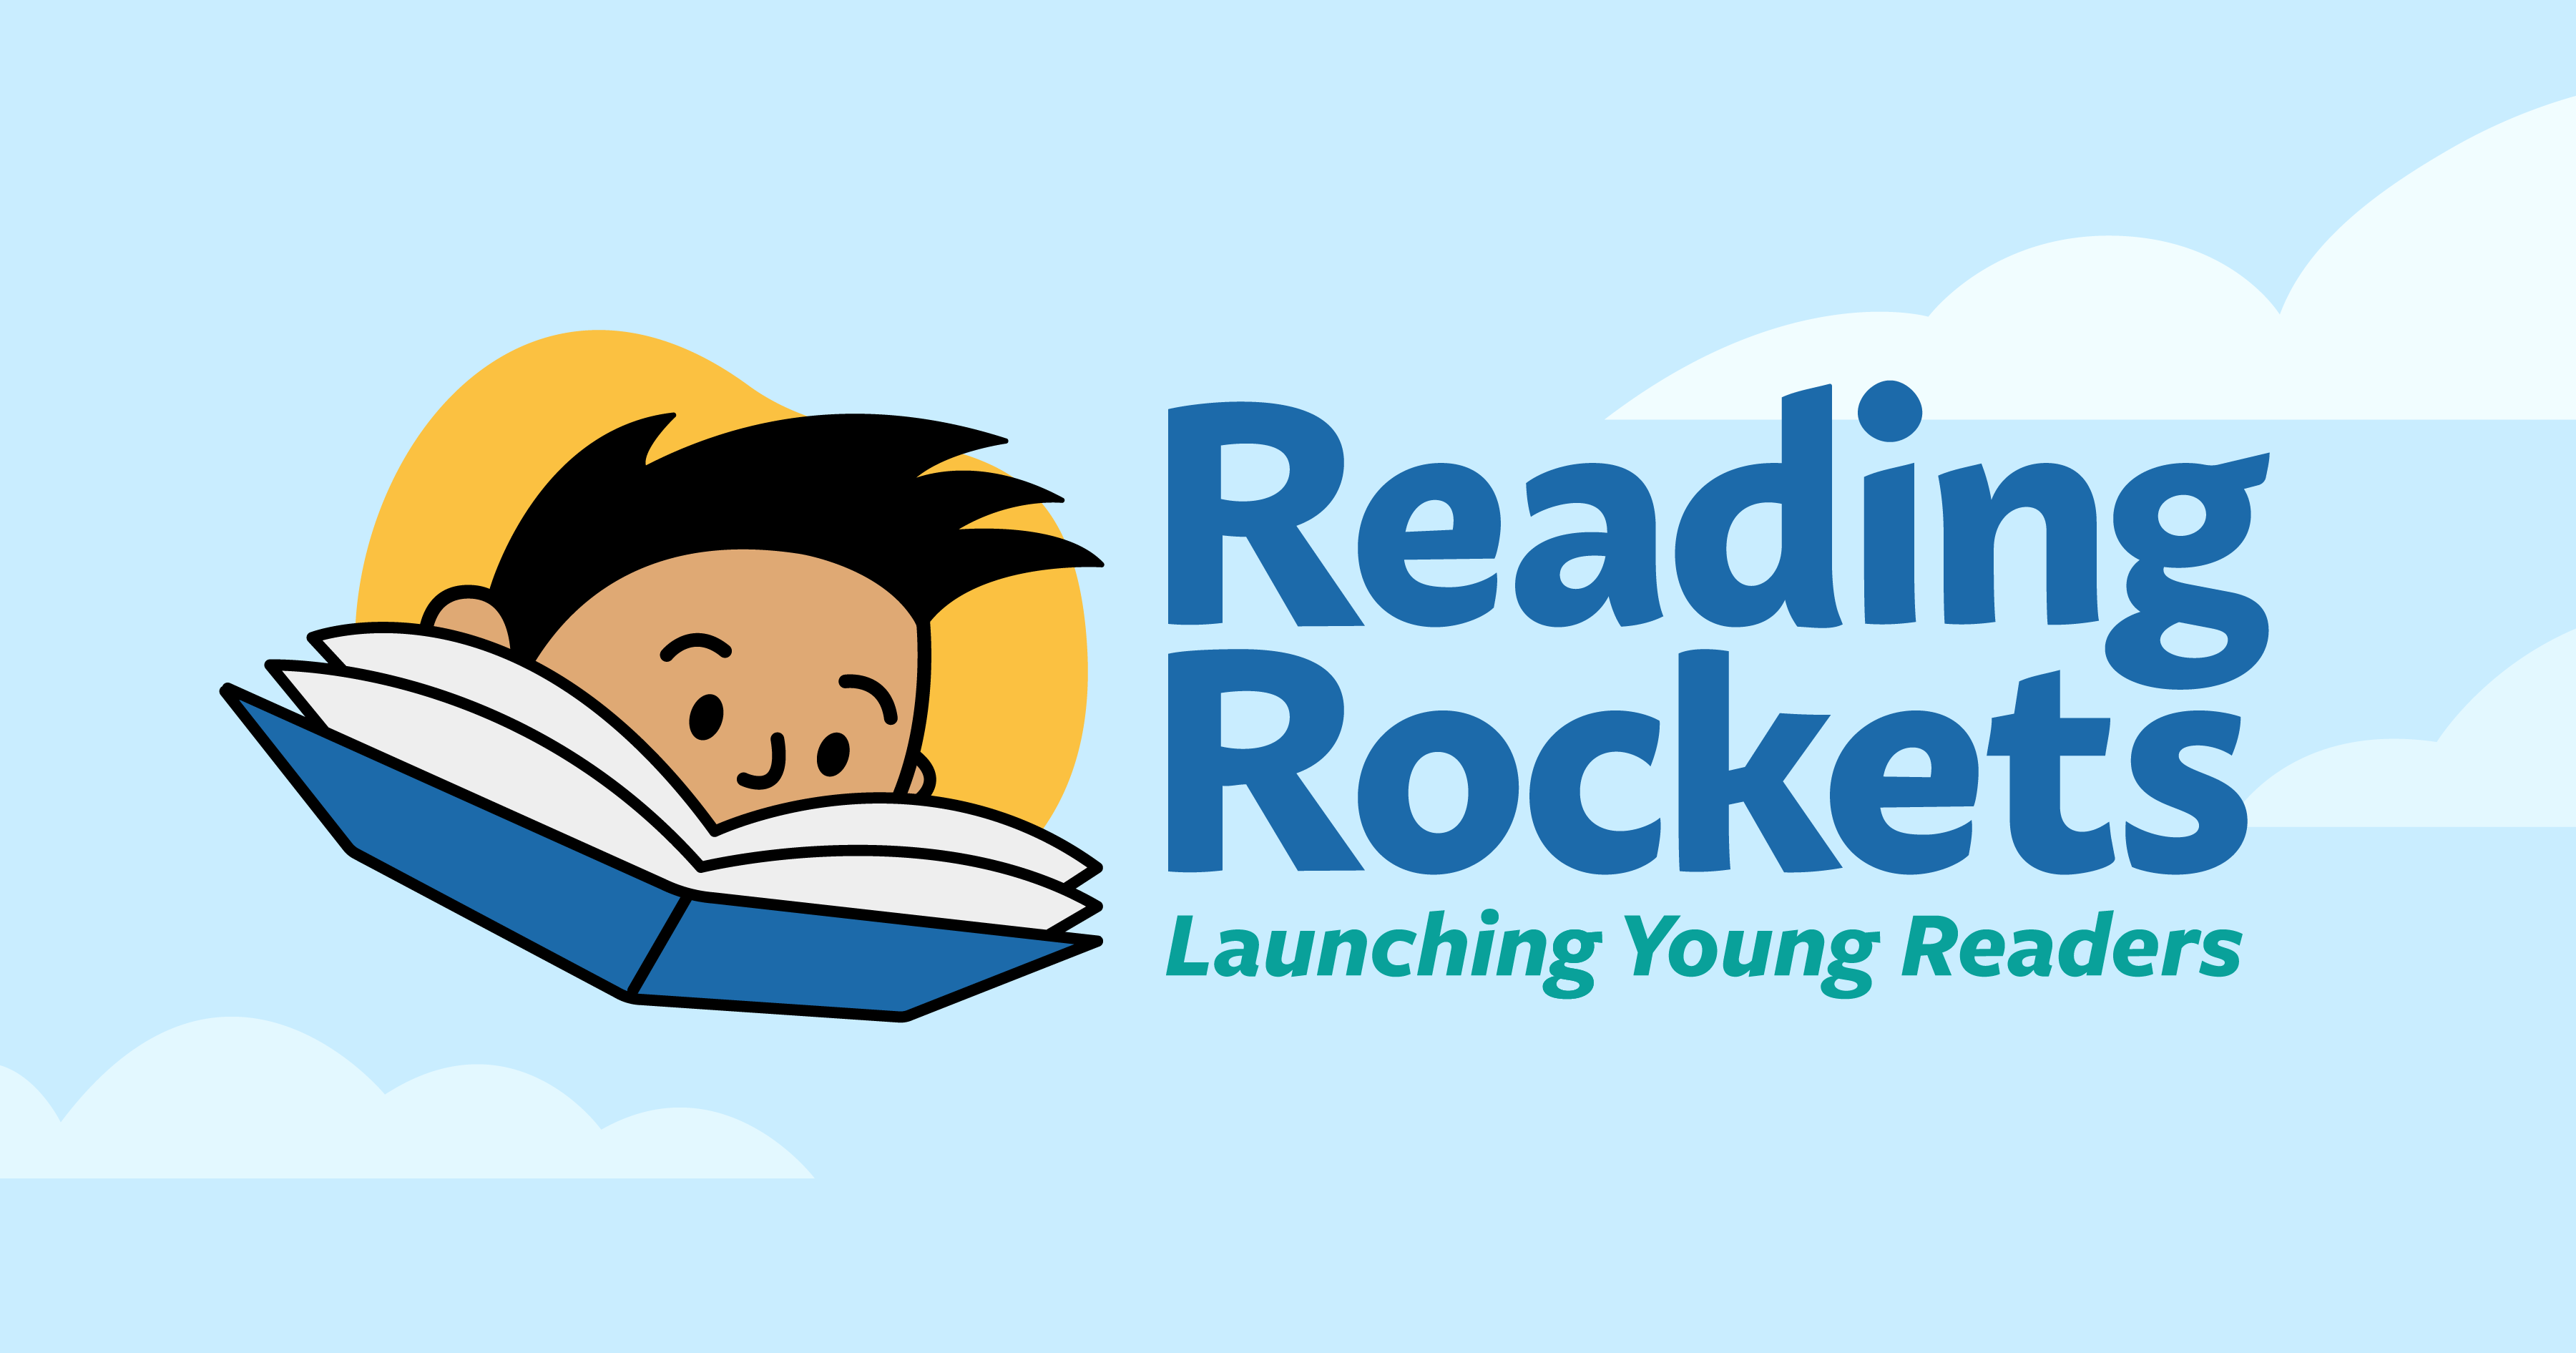 About Reading Rockets | Reading Rockets